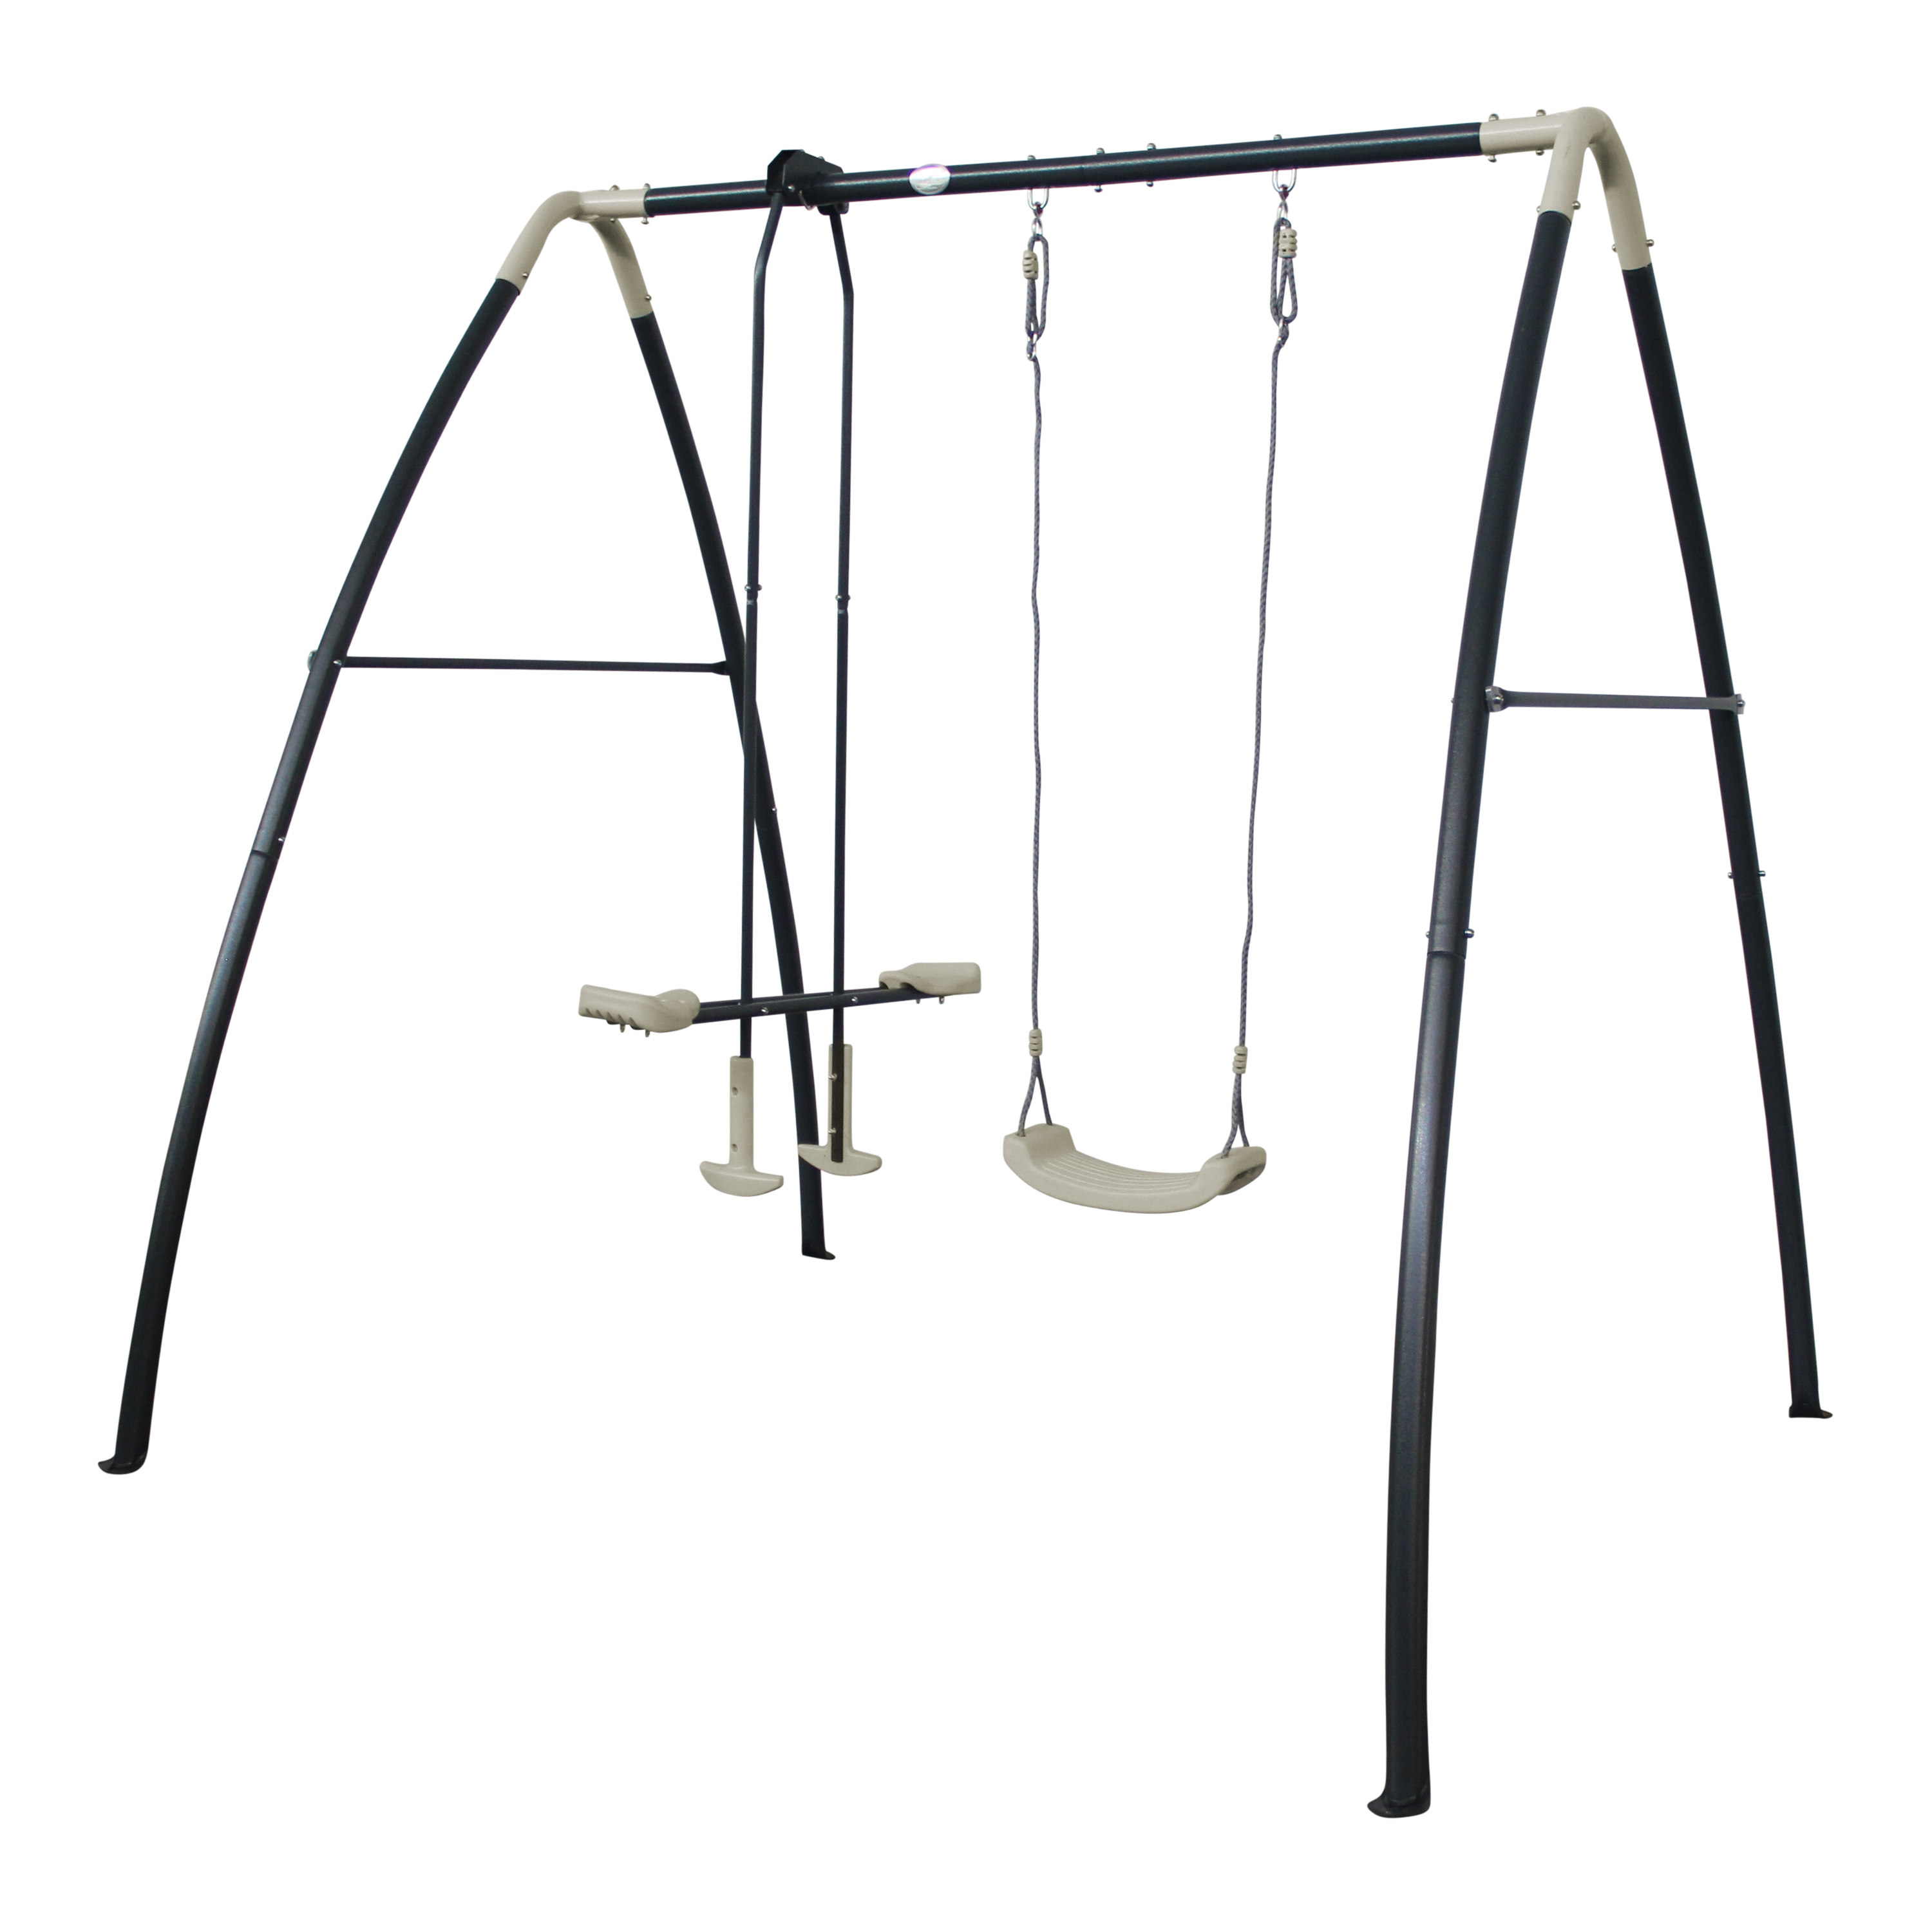 Metal Swing Set with One and Two Person Swings Anthracite/cream